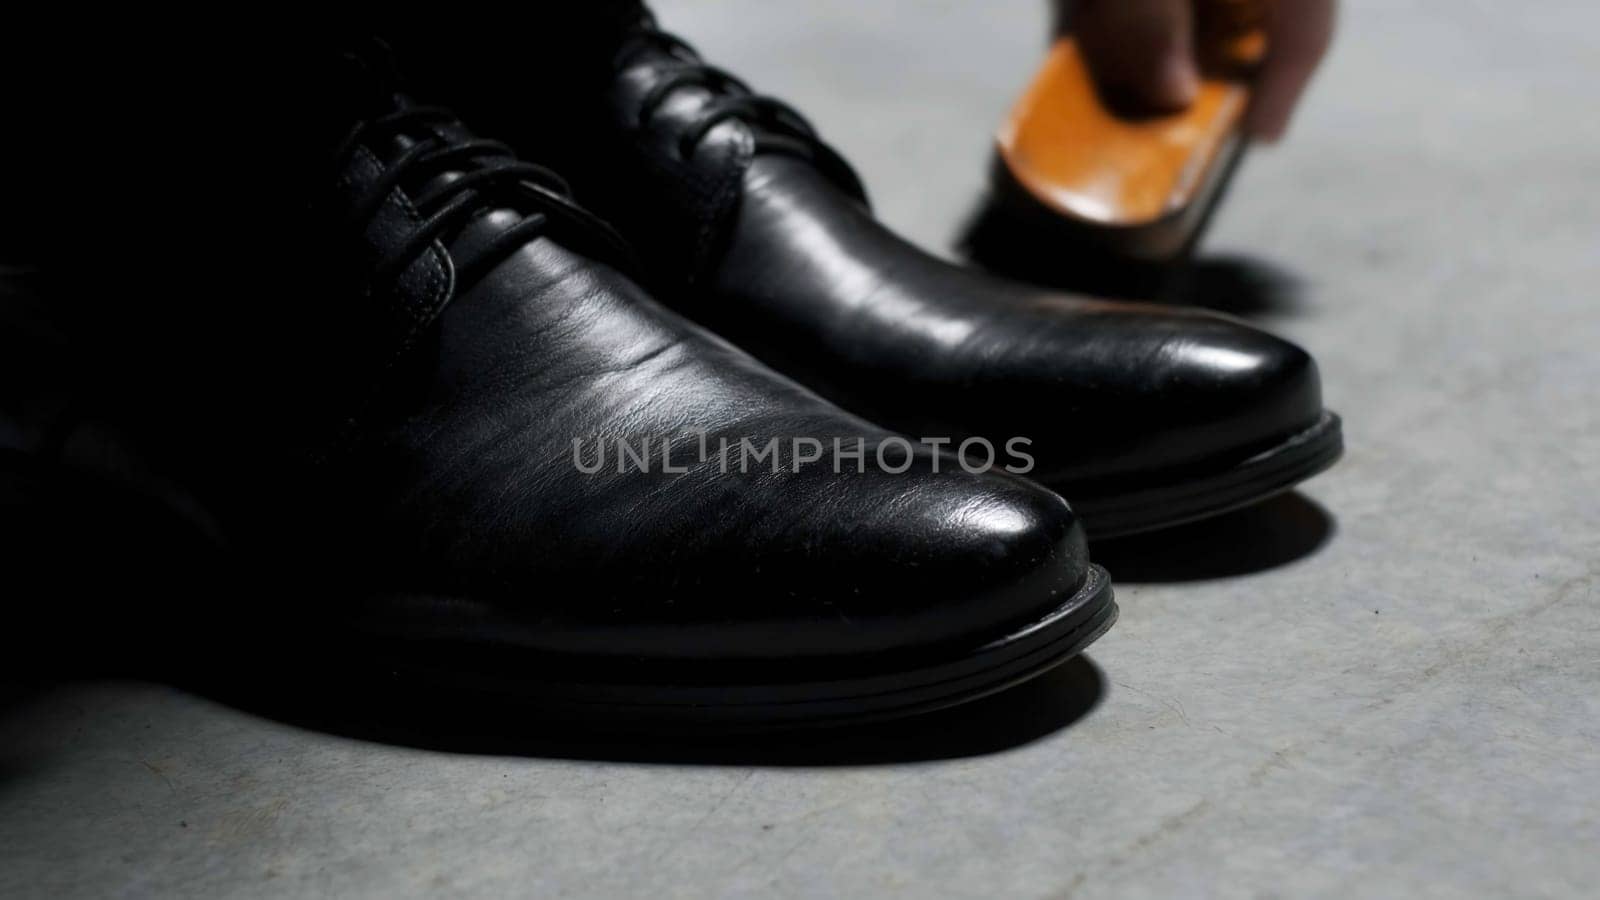 Waxing leather black classic shoes. Stock footage. Close up of cleaning and polishing boots